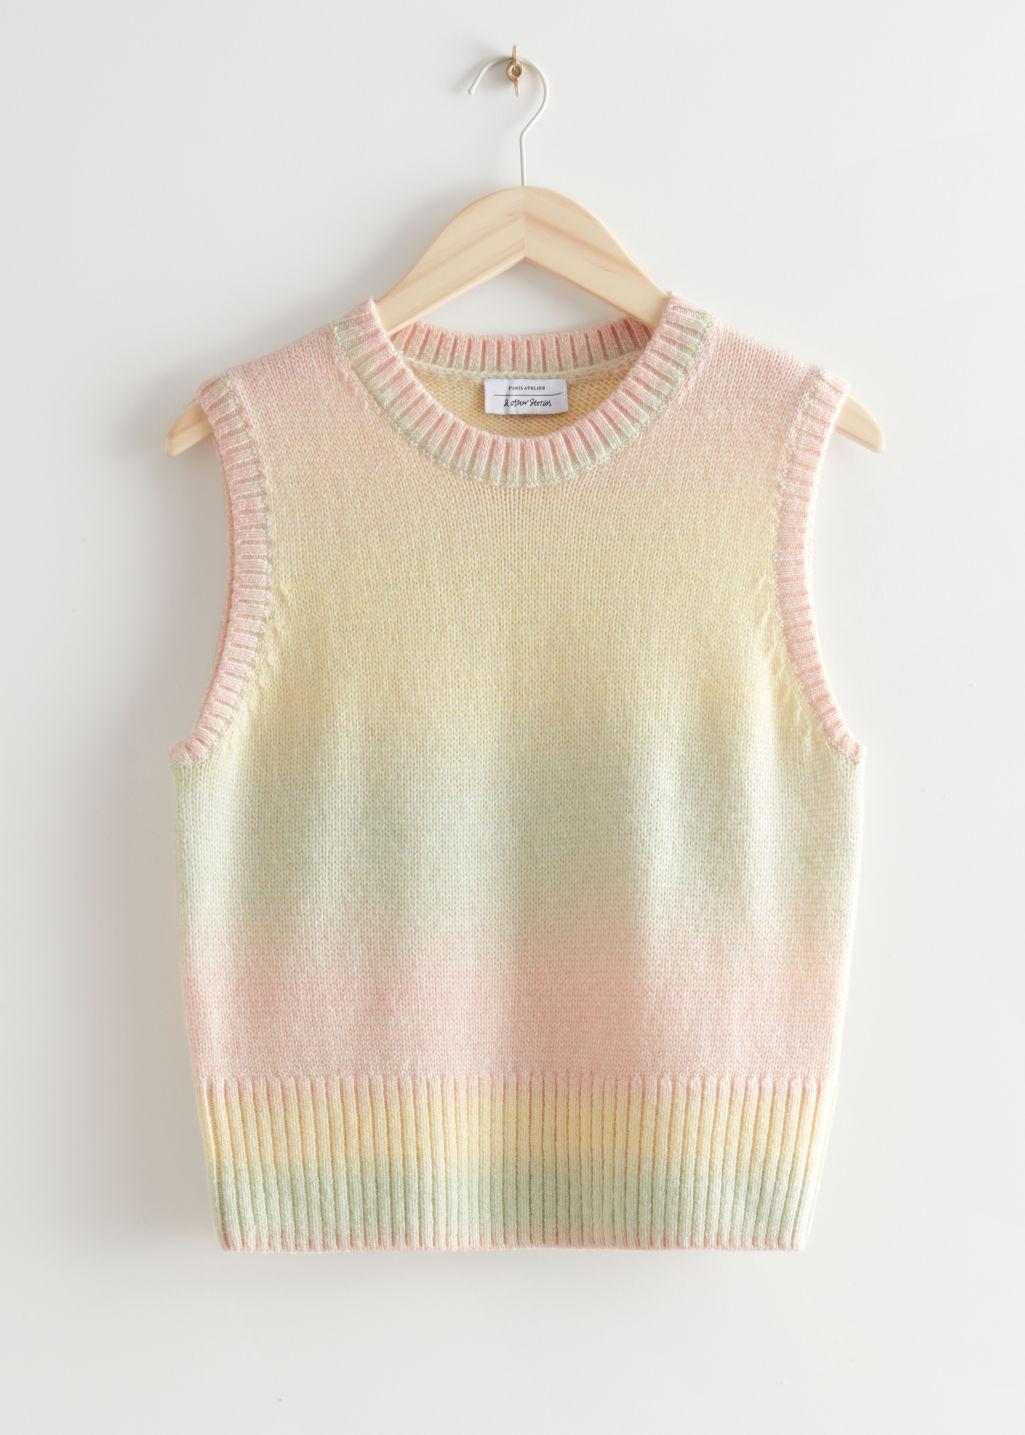 & Other Stories Rainbow Knit Vest in Green | Lyst Canada